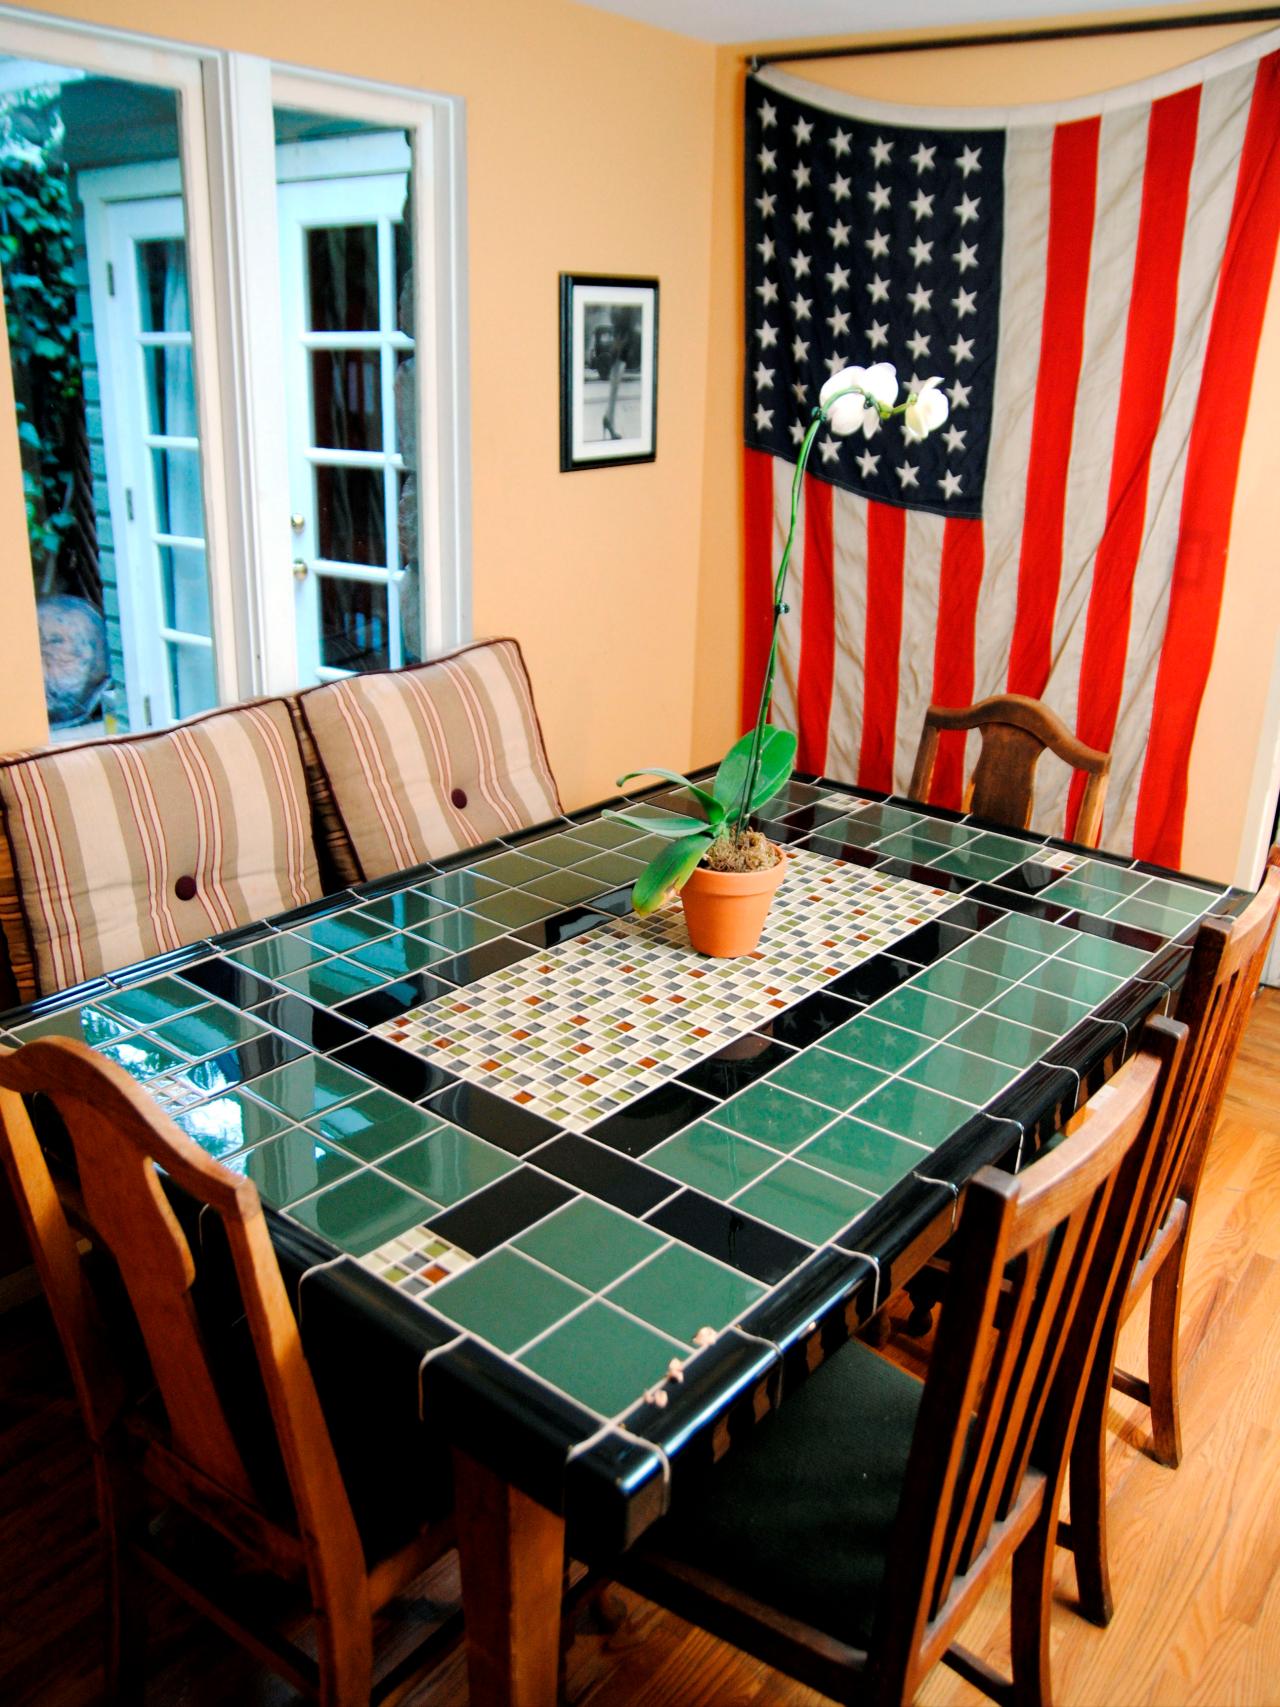 Create A Mosaic Tile Tabletop, Tile Top Dining Room Sets